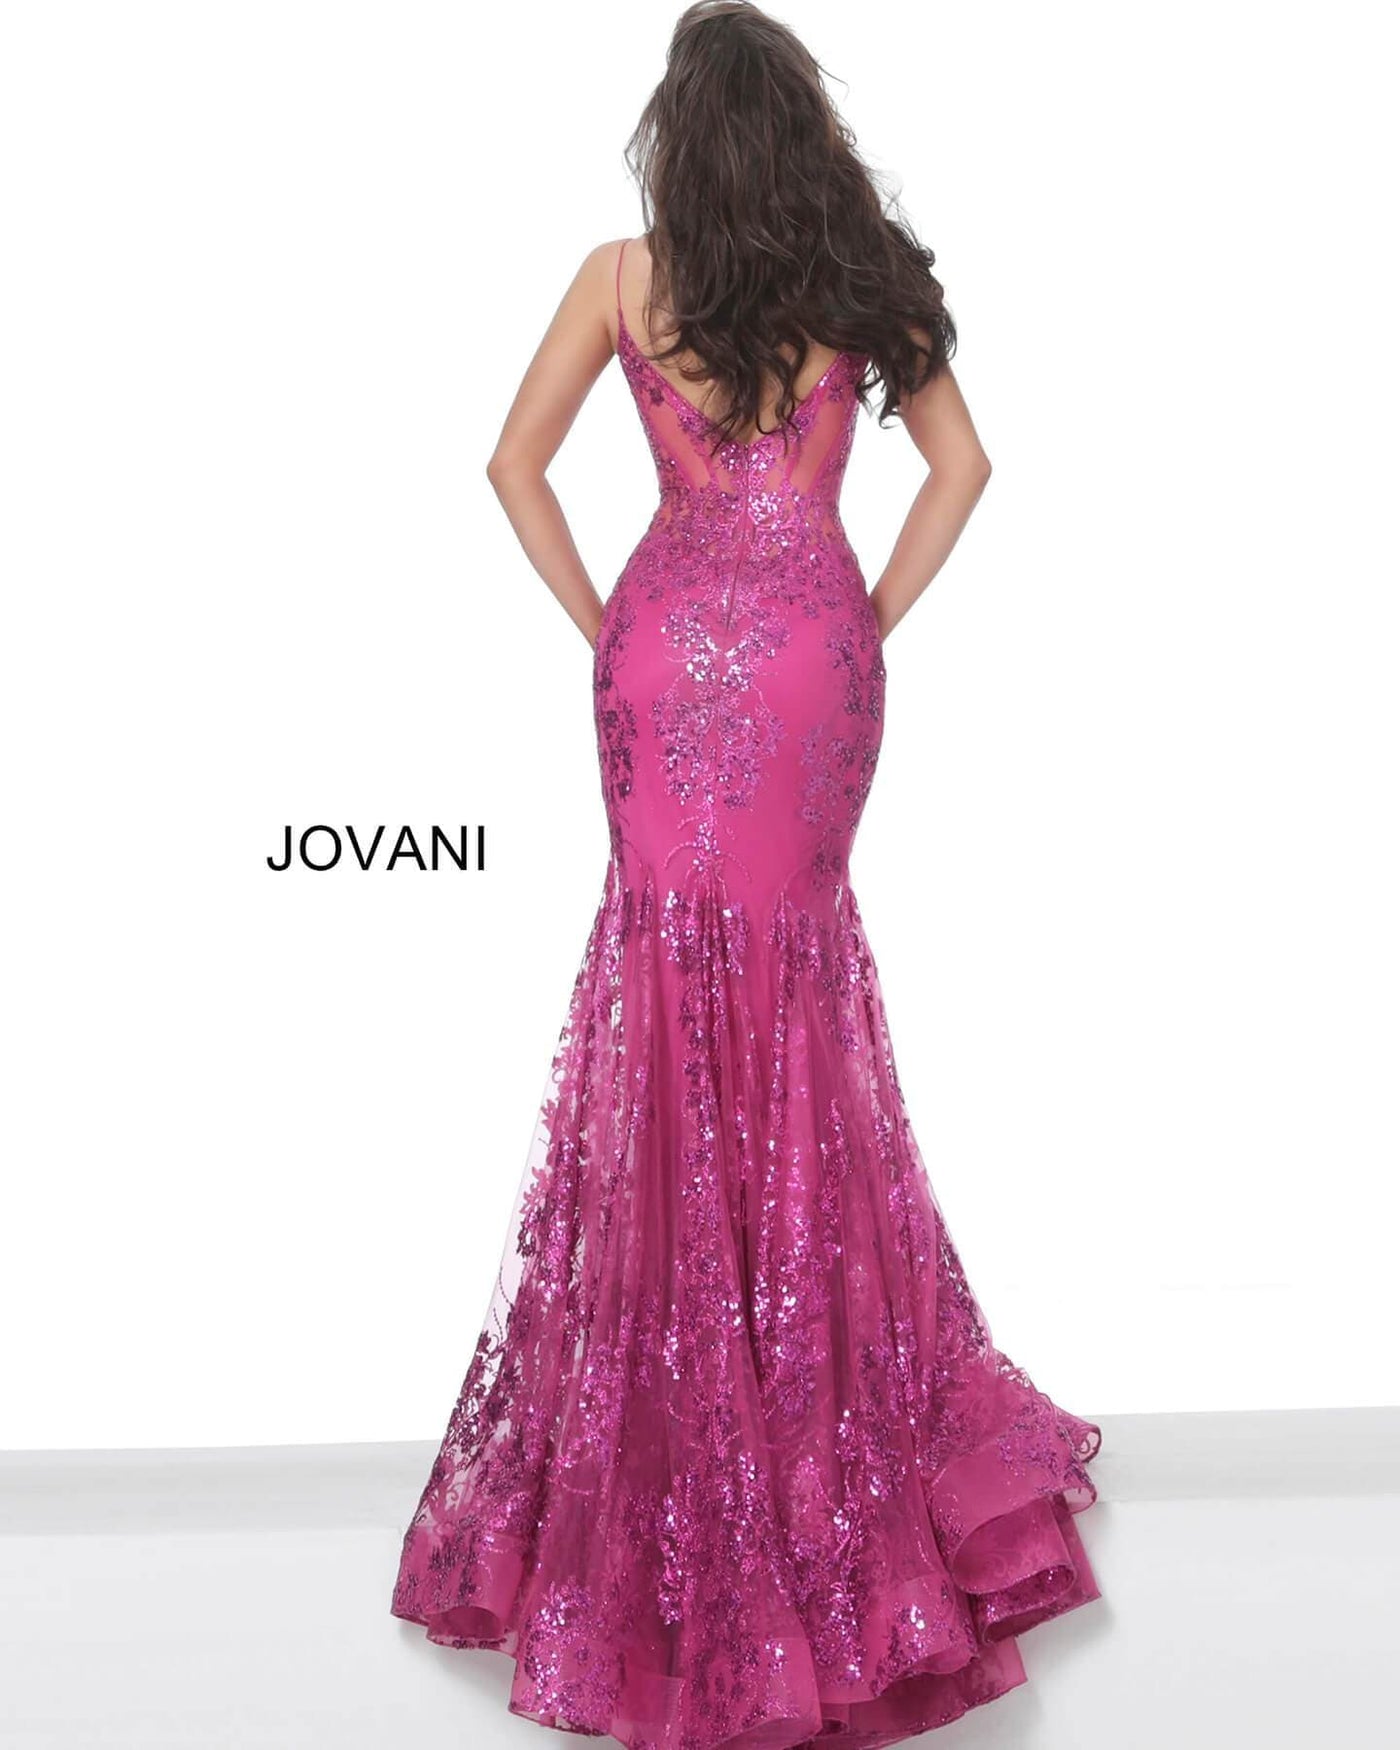 Jovani - 3675 Sequined Illusion Corset Mermaid Gown Pageant Dresses